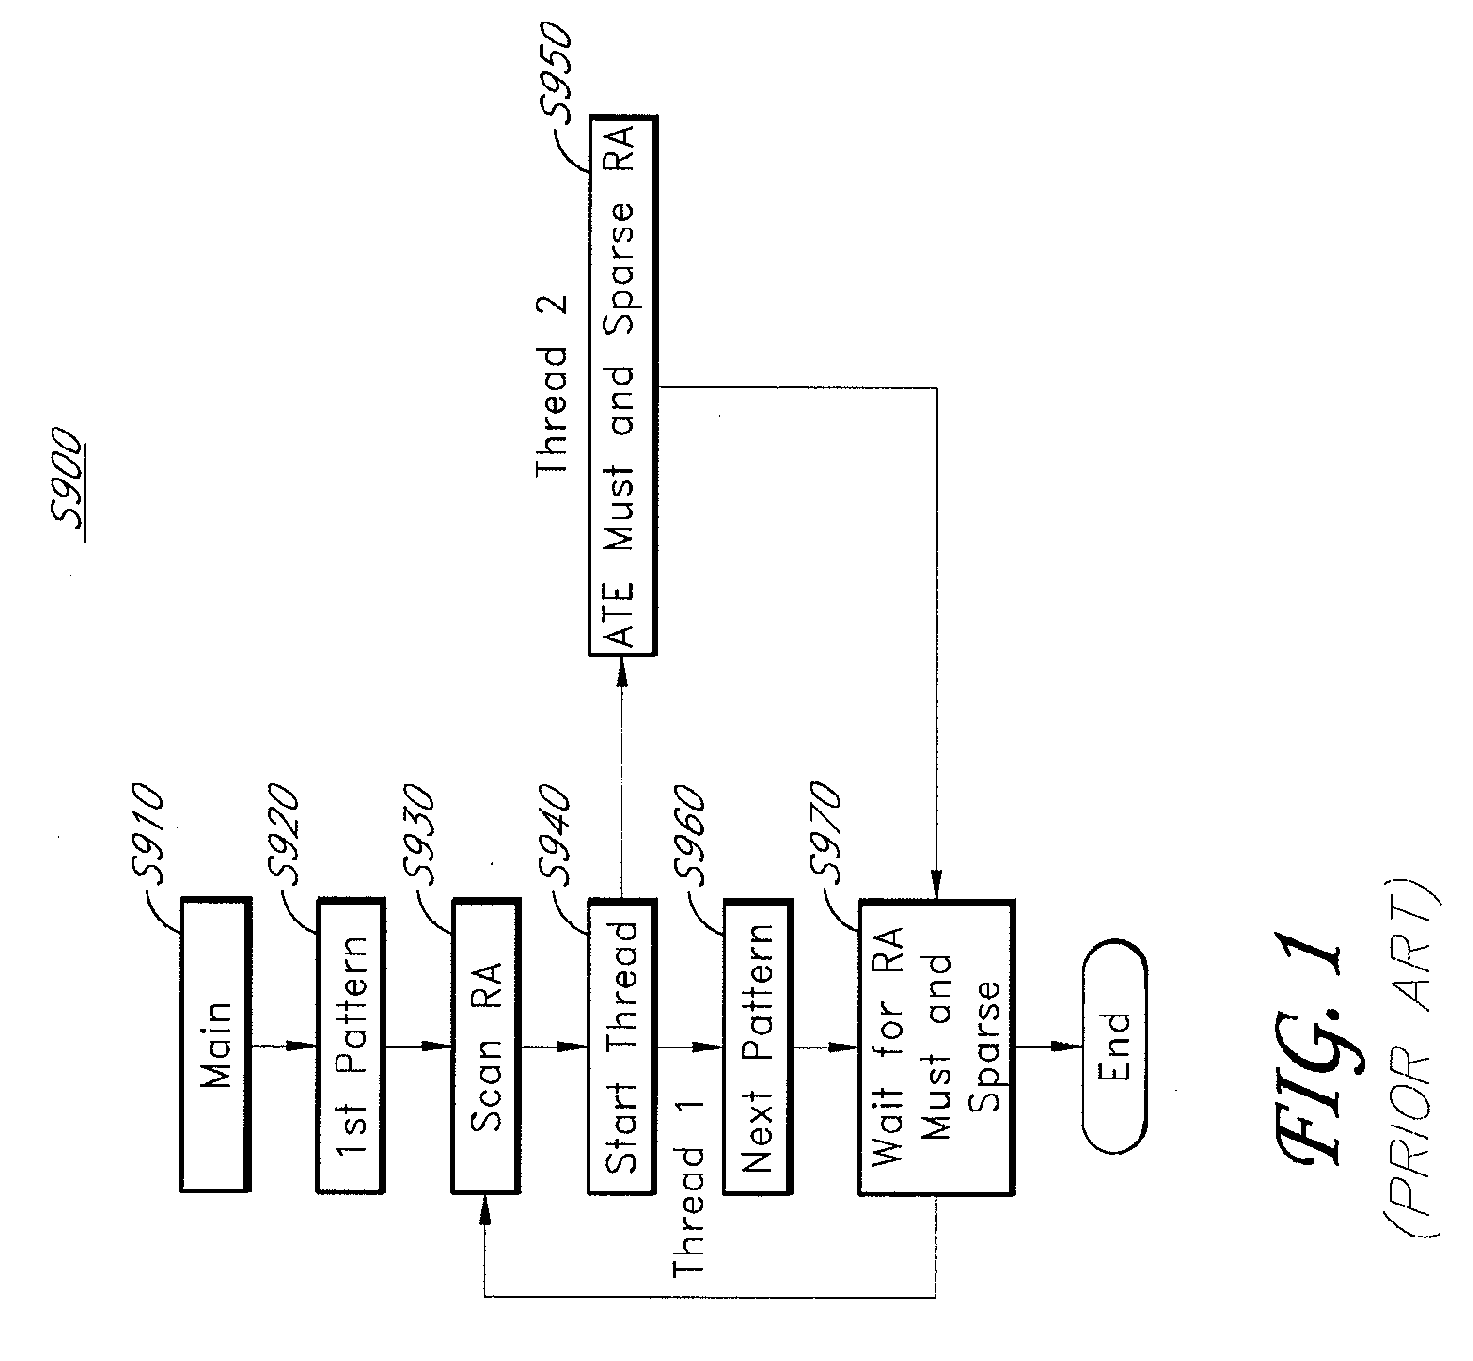 System and method for running test and redundancy analysis in parallel